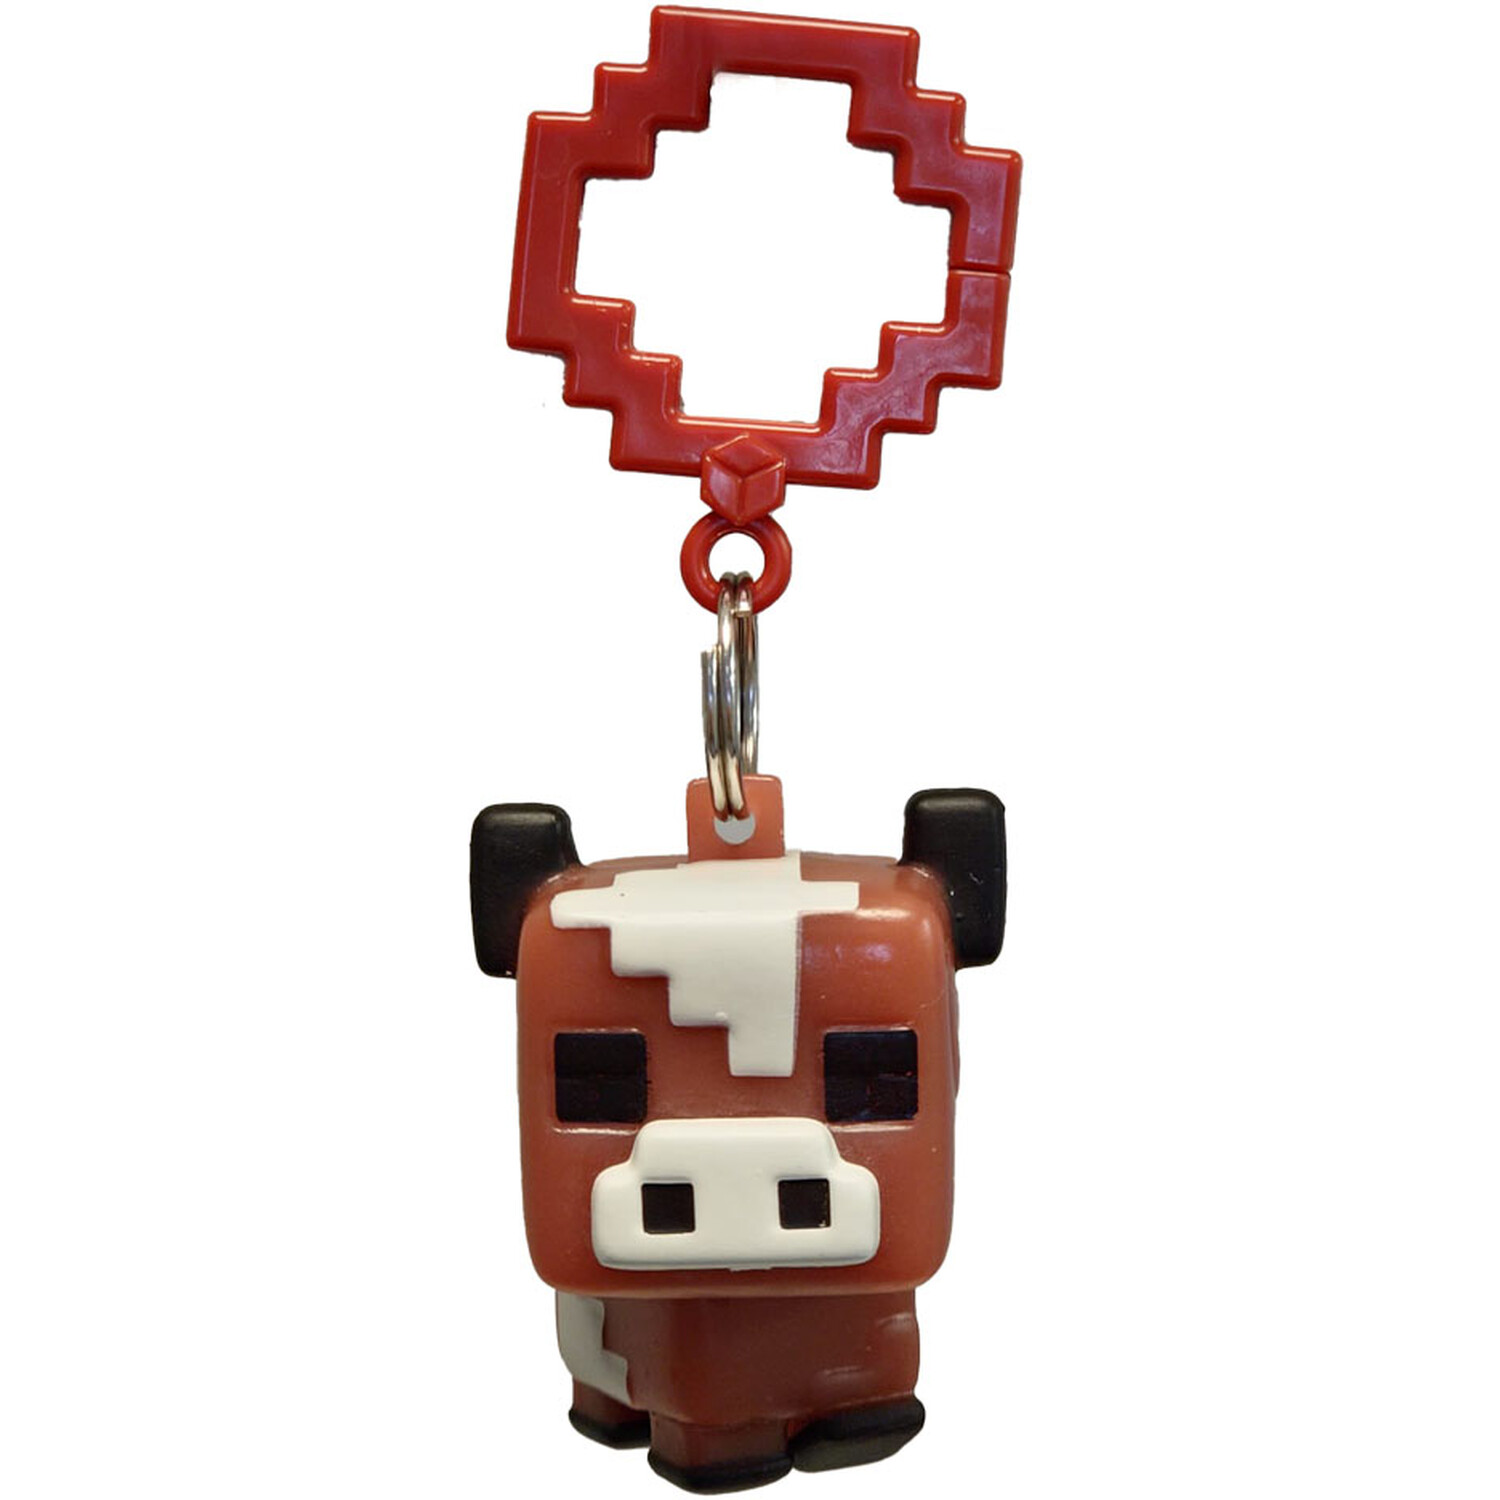 Single Minecraft Backpack Hanger Figure in Assorted styles Image 2